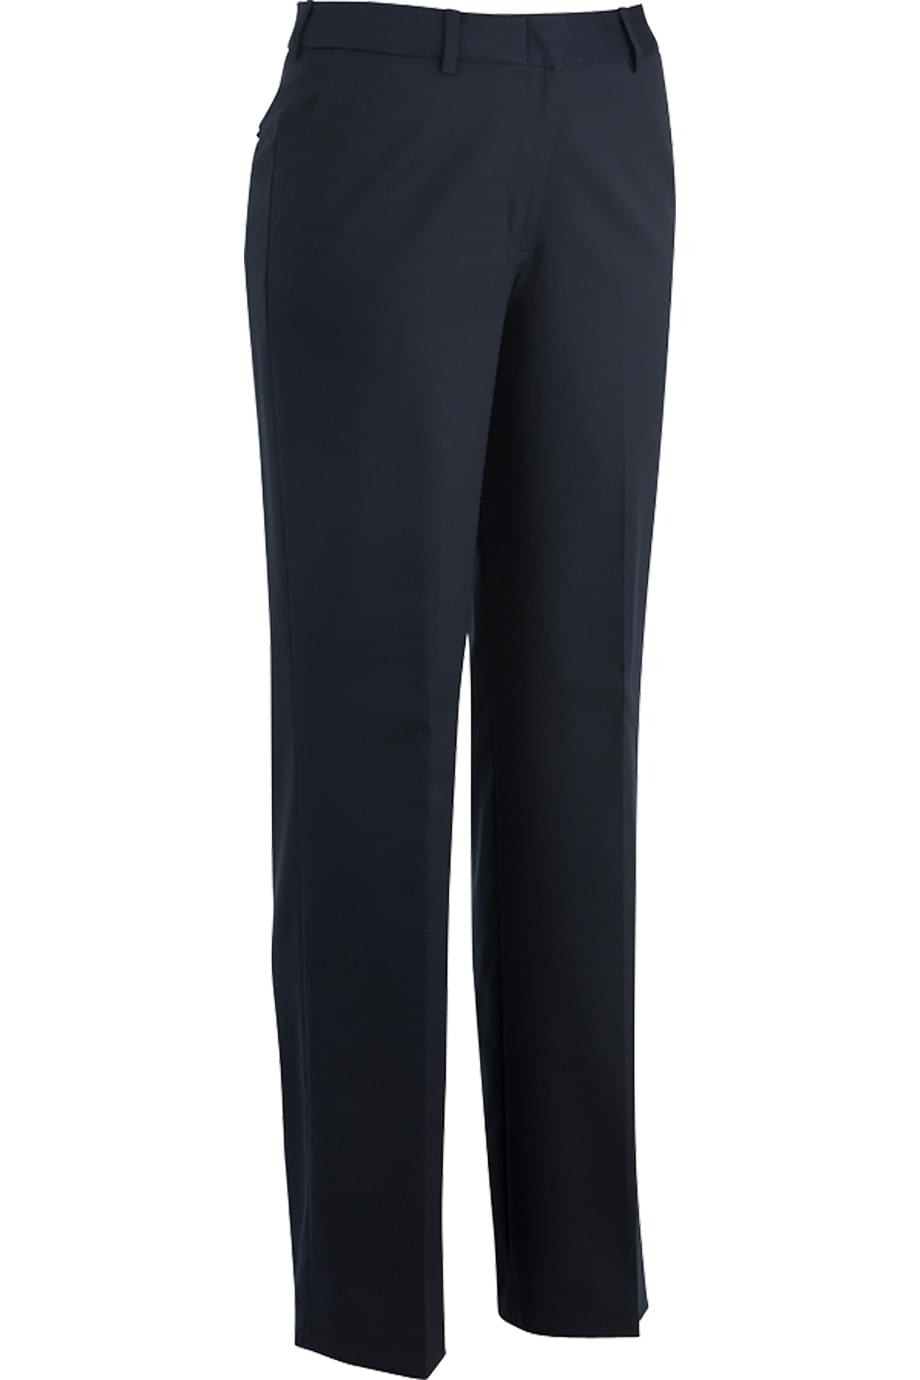 Redwood & Ross Collection 0 Ladies' Navy Redwood & Ross Dress Pant